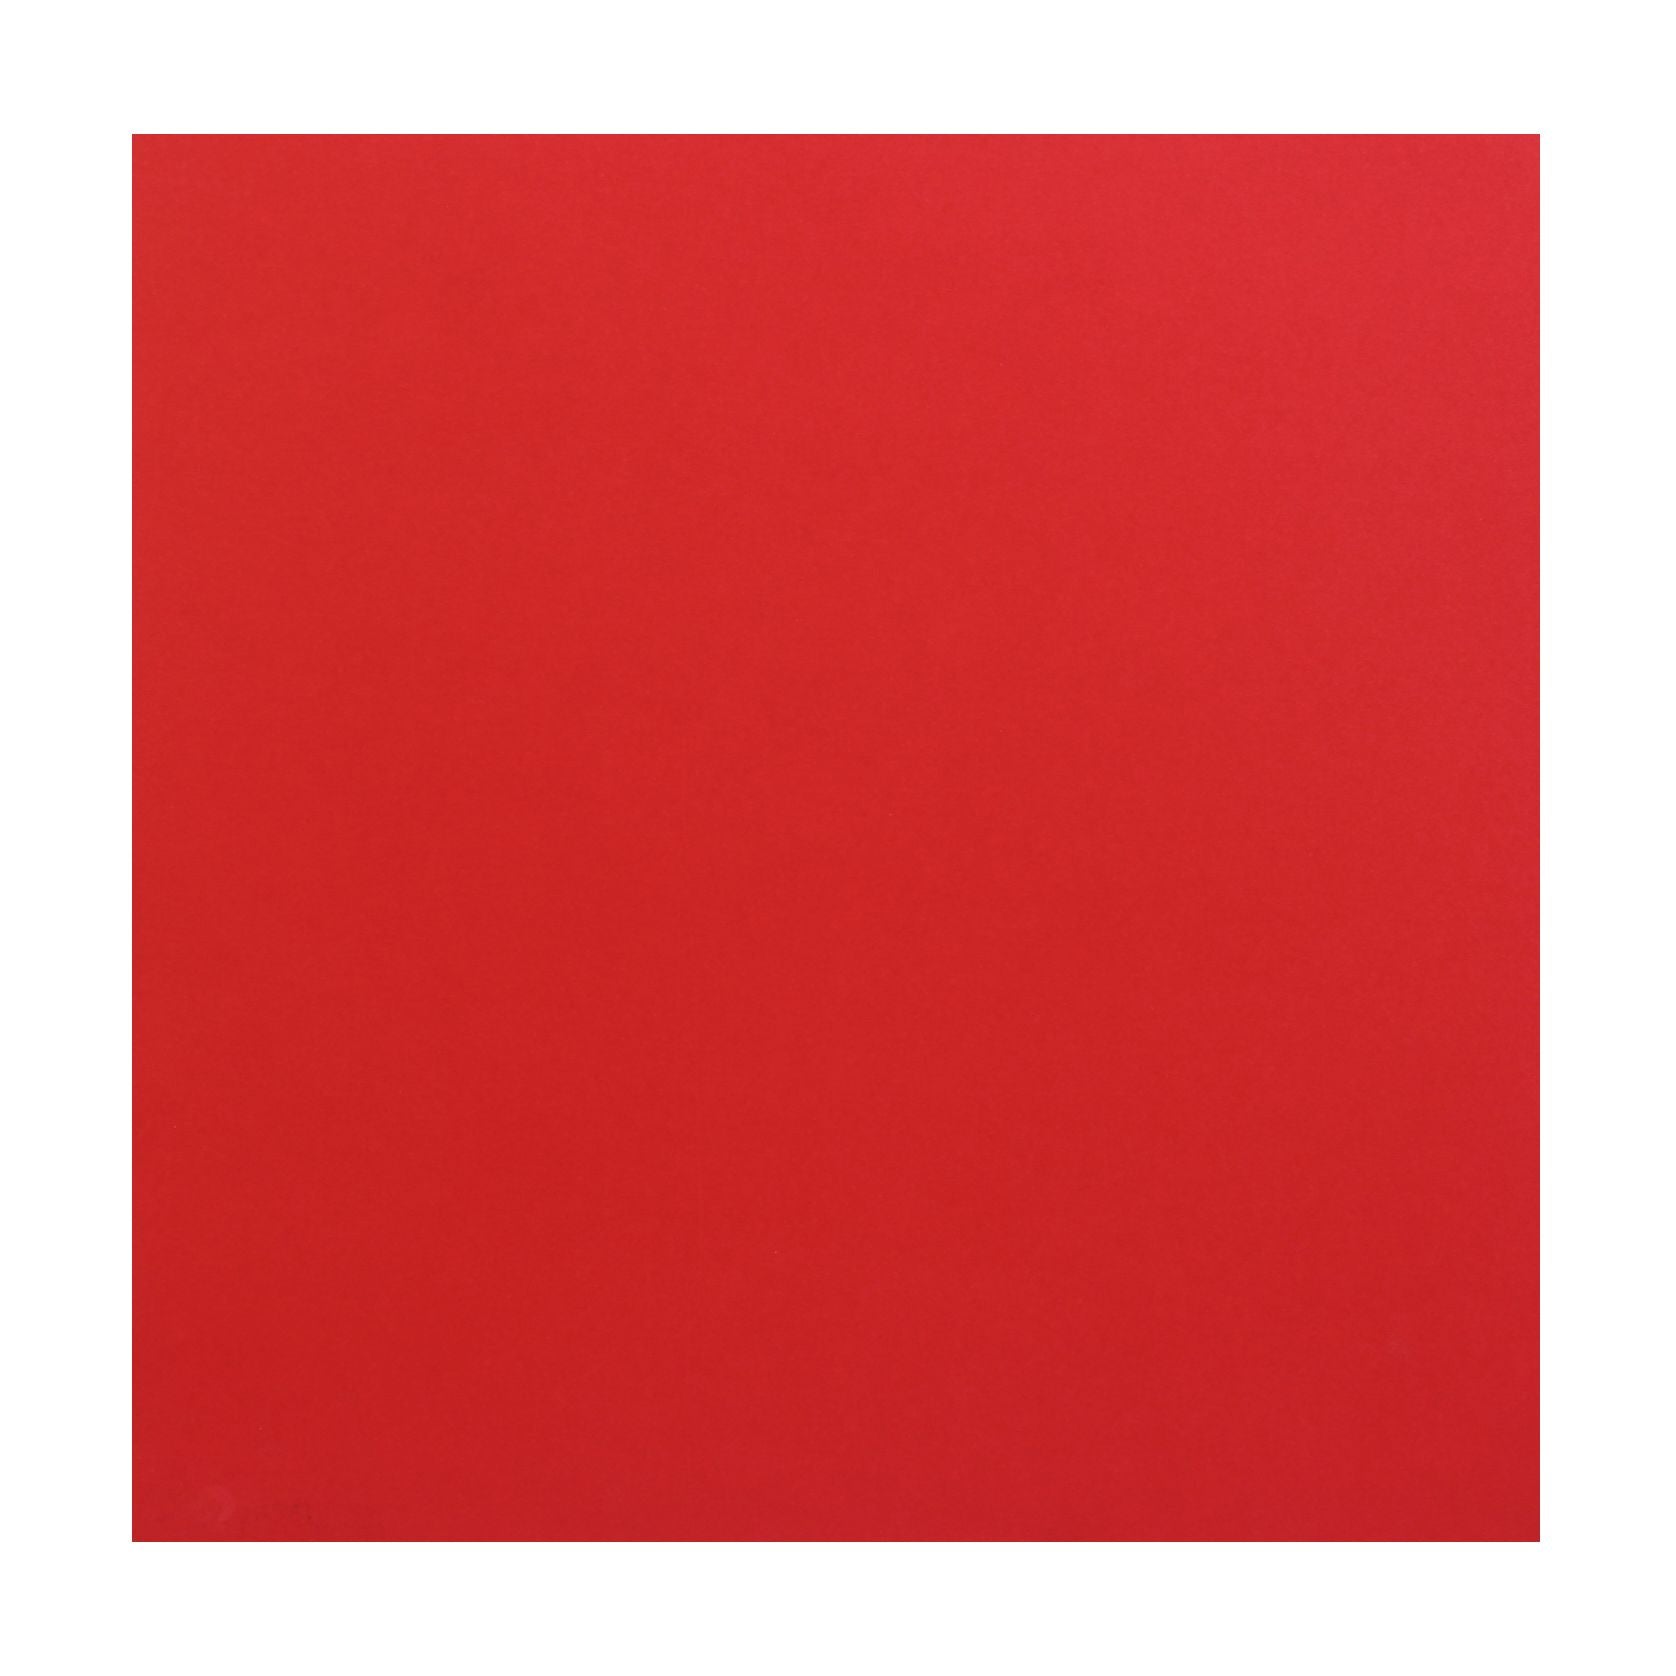 Card Stock 220Gsm 12Inch X 12Inch Red 1Sheet Lb